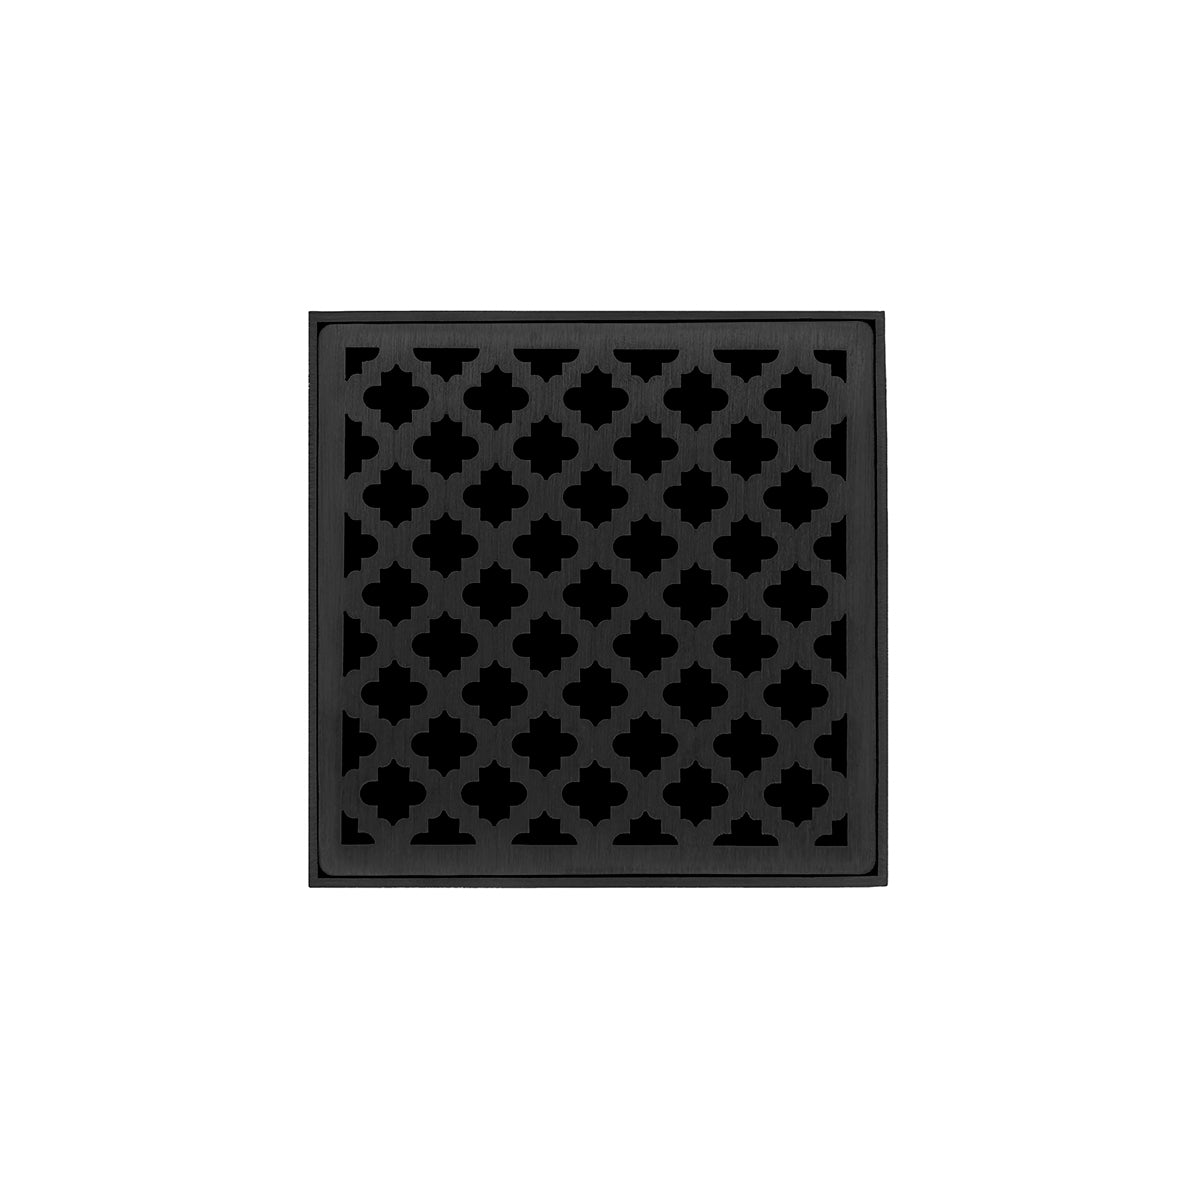 Infinity Drain 4" x 4" MD 4 Premium Center Drain Kit with Moor Pattern Decorative Plate with Cast Iron Drain Body for Hot Mop, 2" Outlet